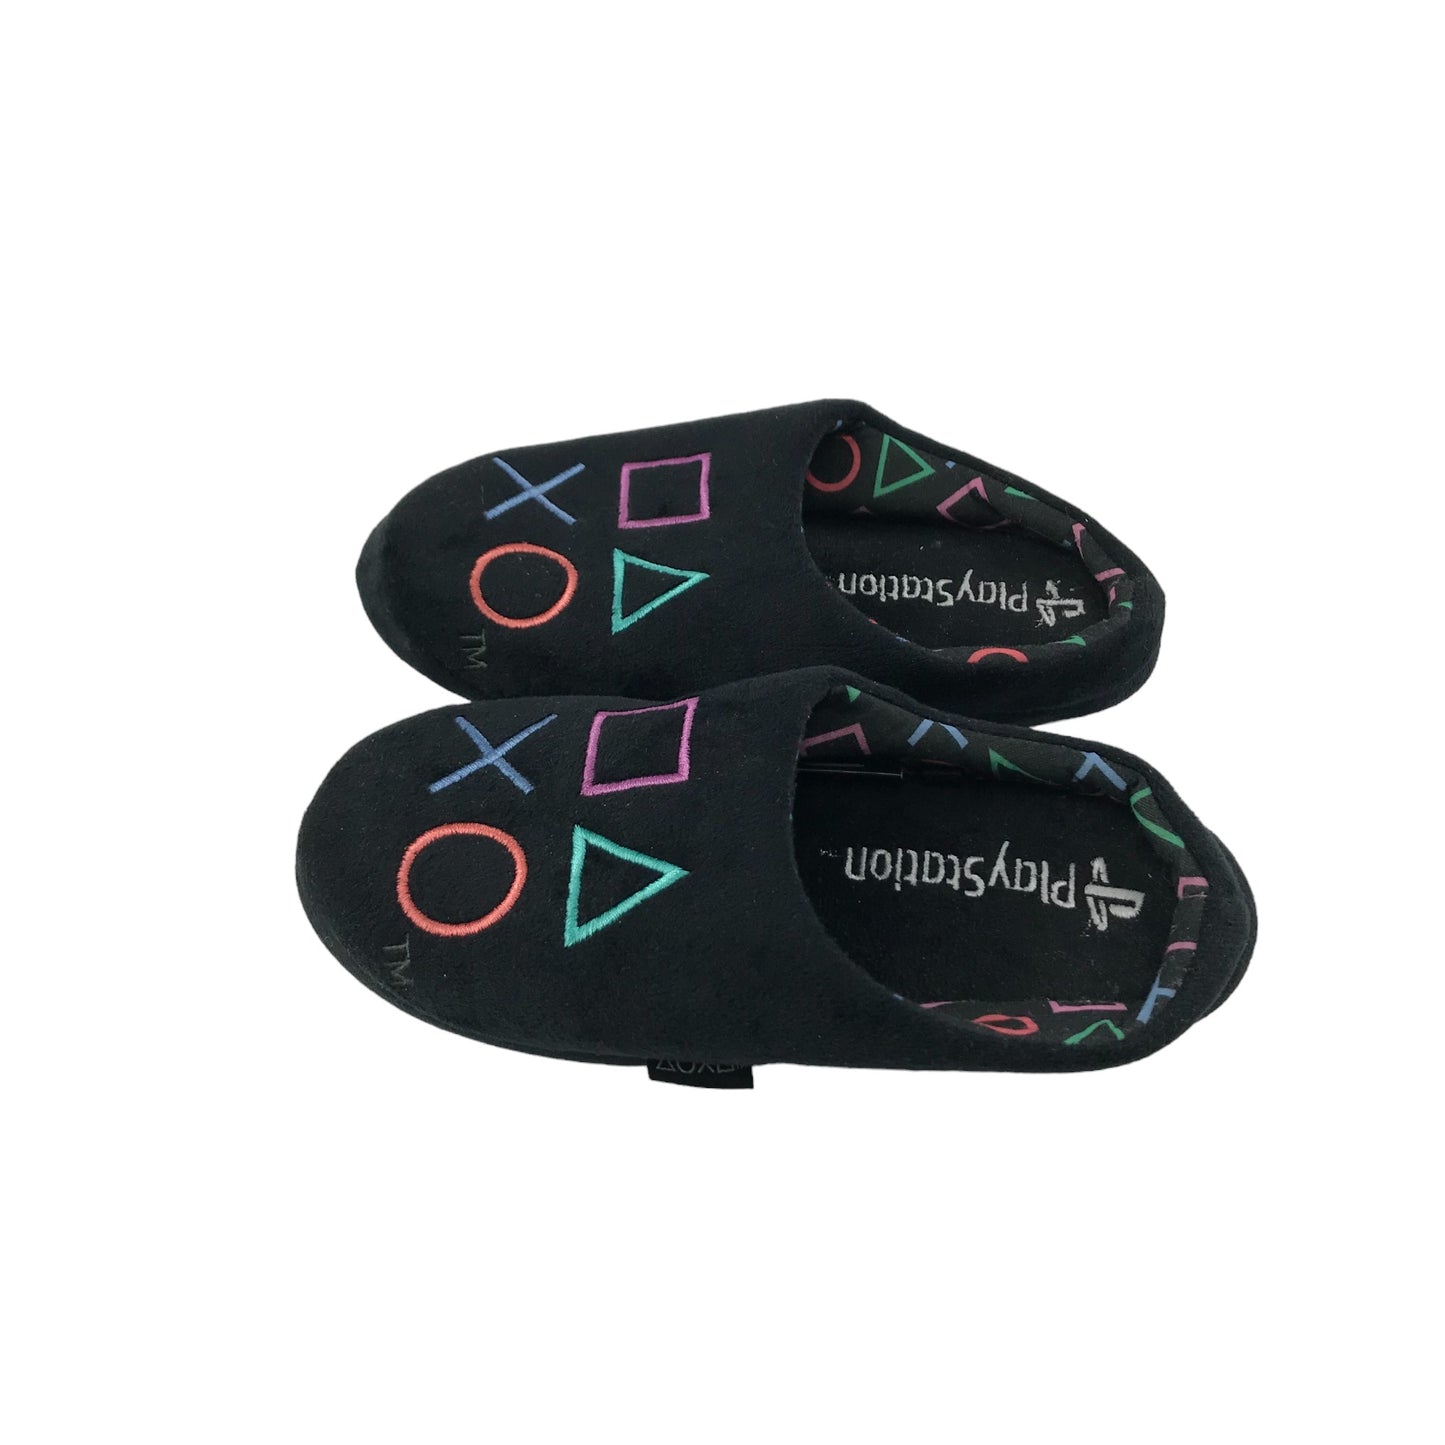 Slippers Shoe Size 3-4 Black PlayStation Gaming